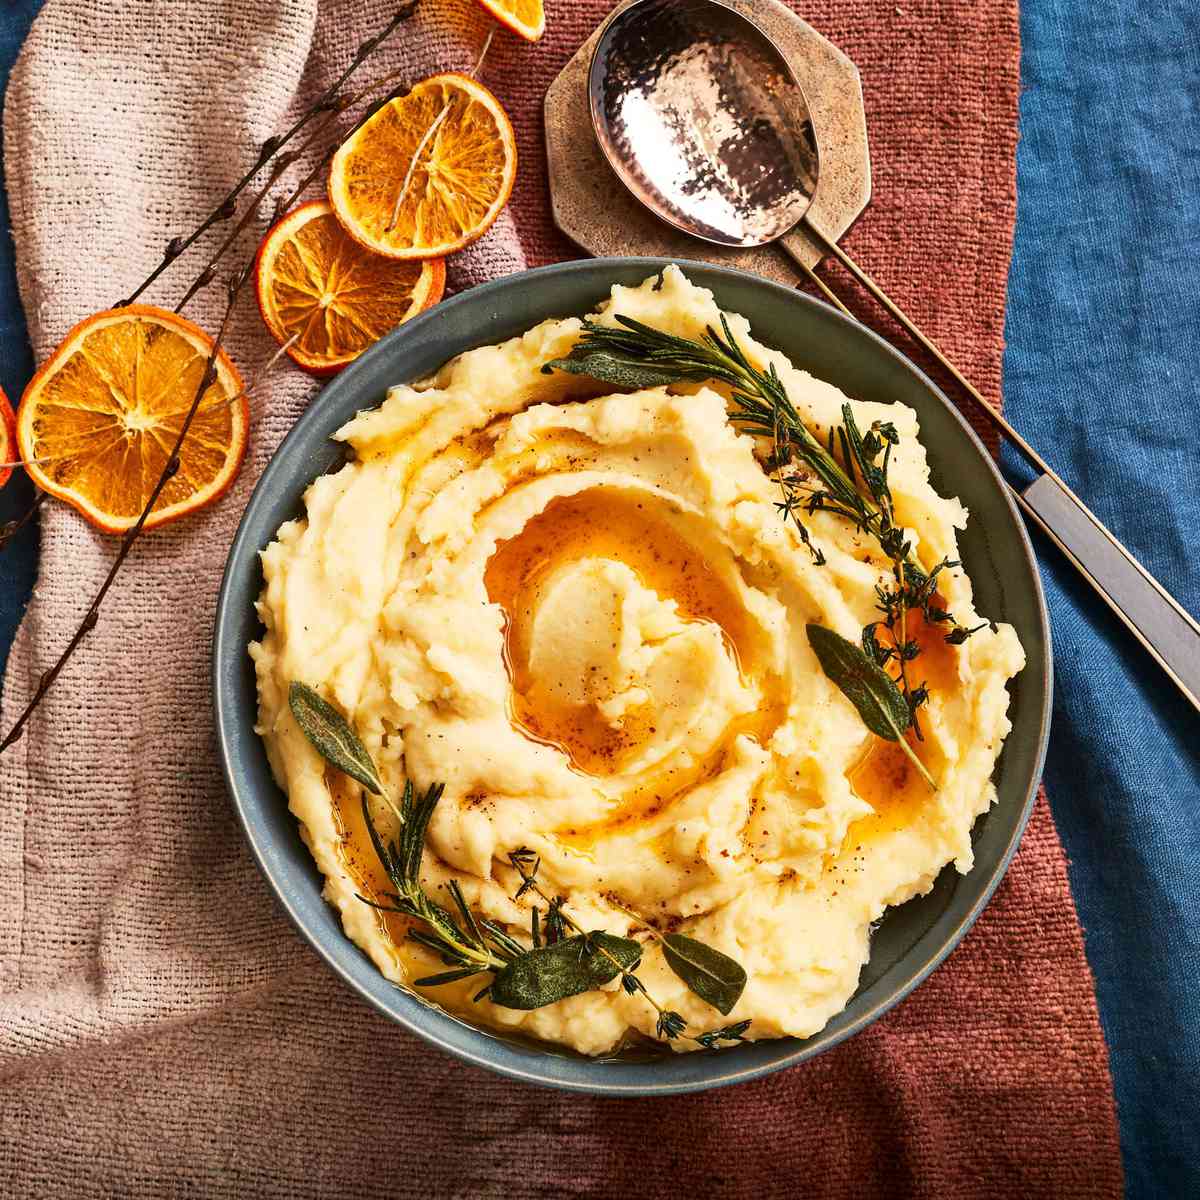 Classic Side: Herbed Brown Butter Mashed Potatoes